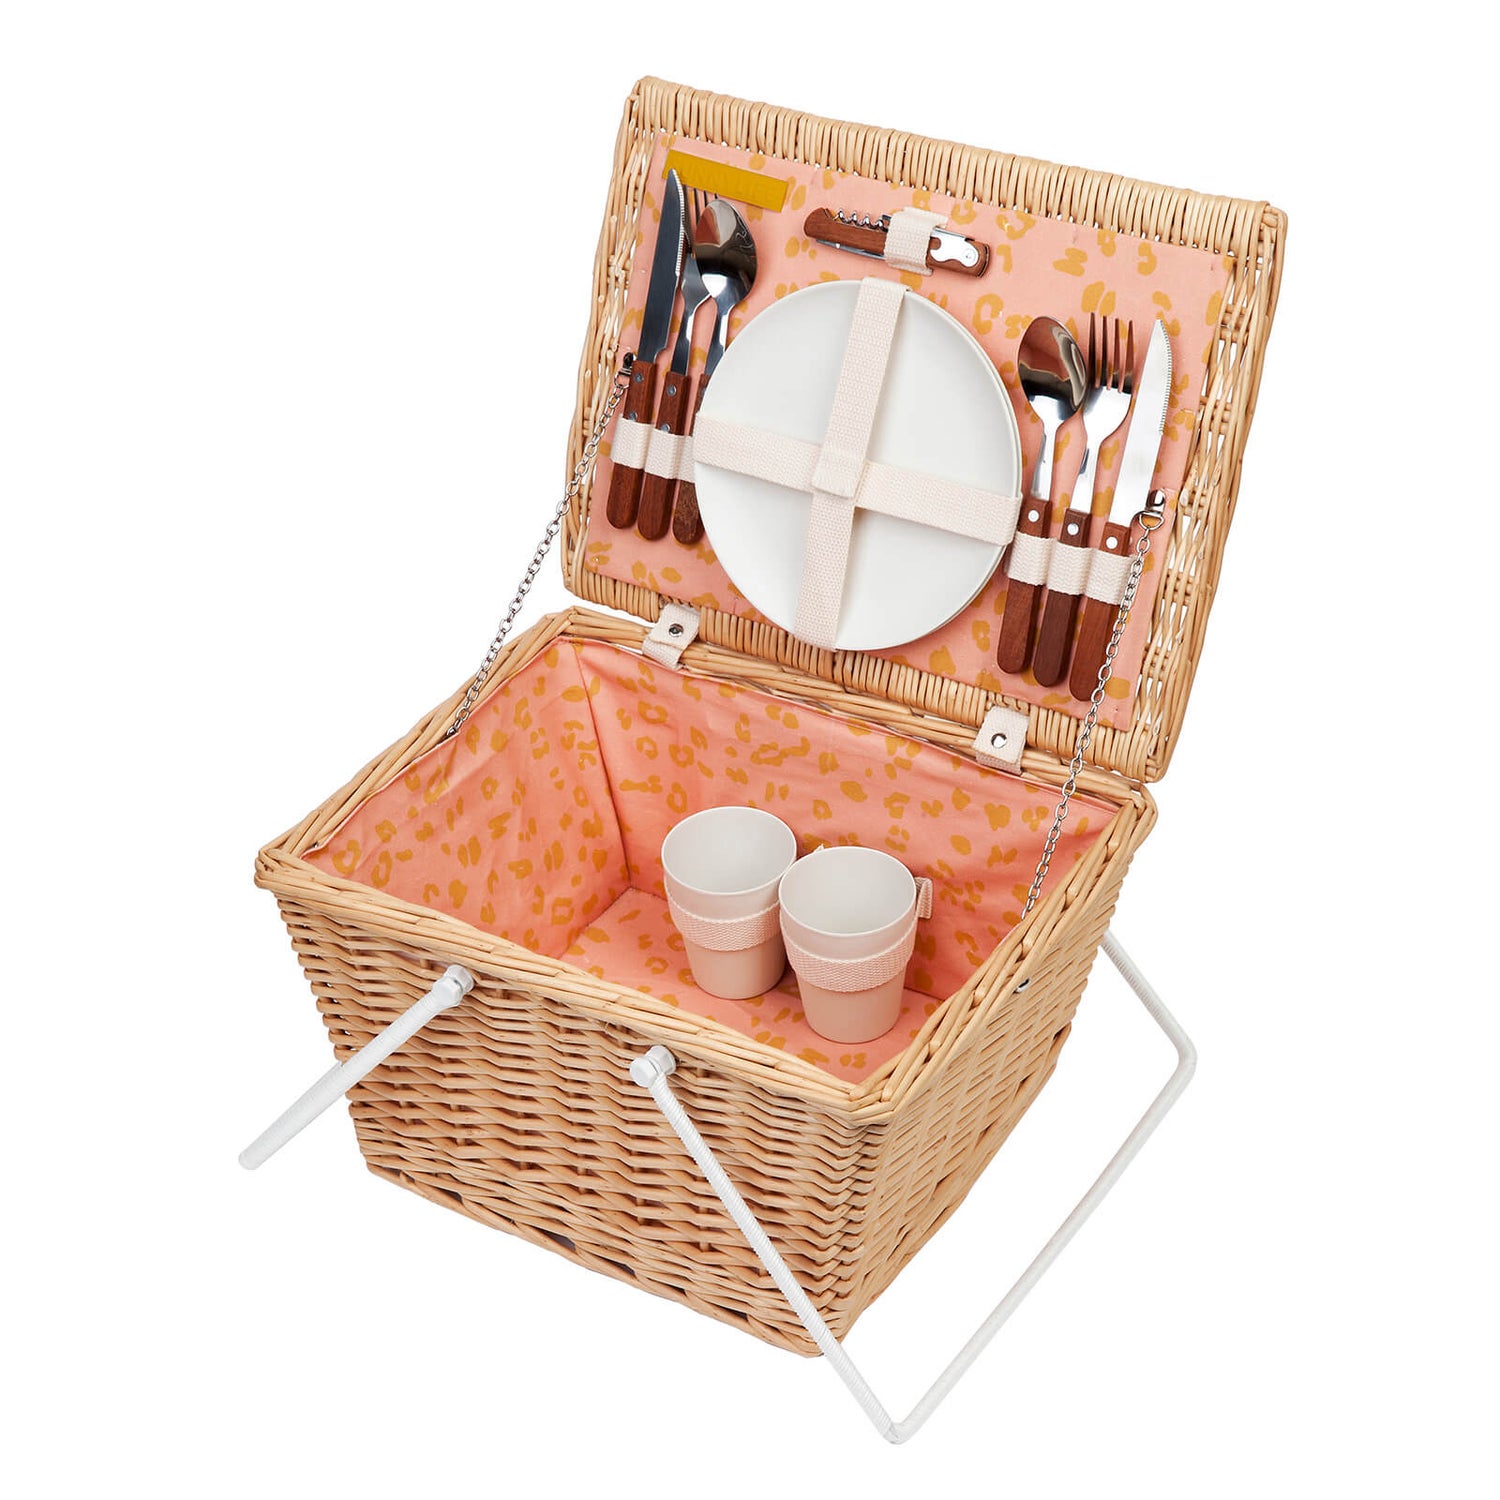 Sunnylife Eco Small Picnic Basket Call of the Wild - Peachy Pink